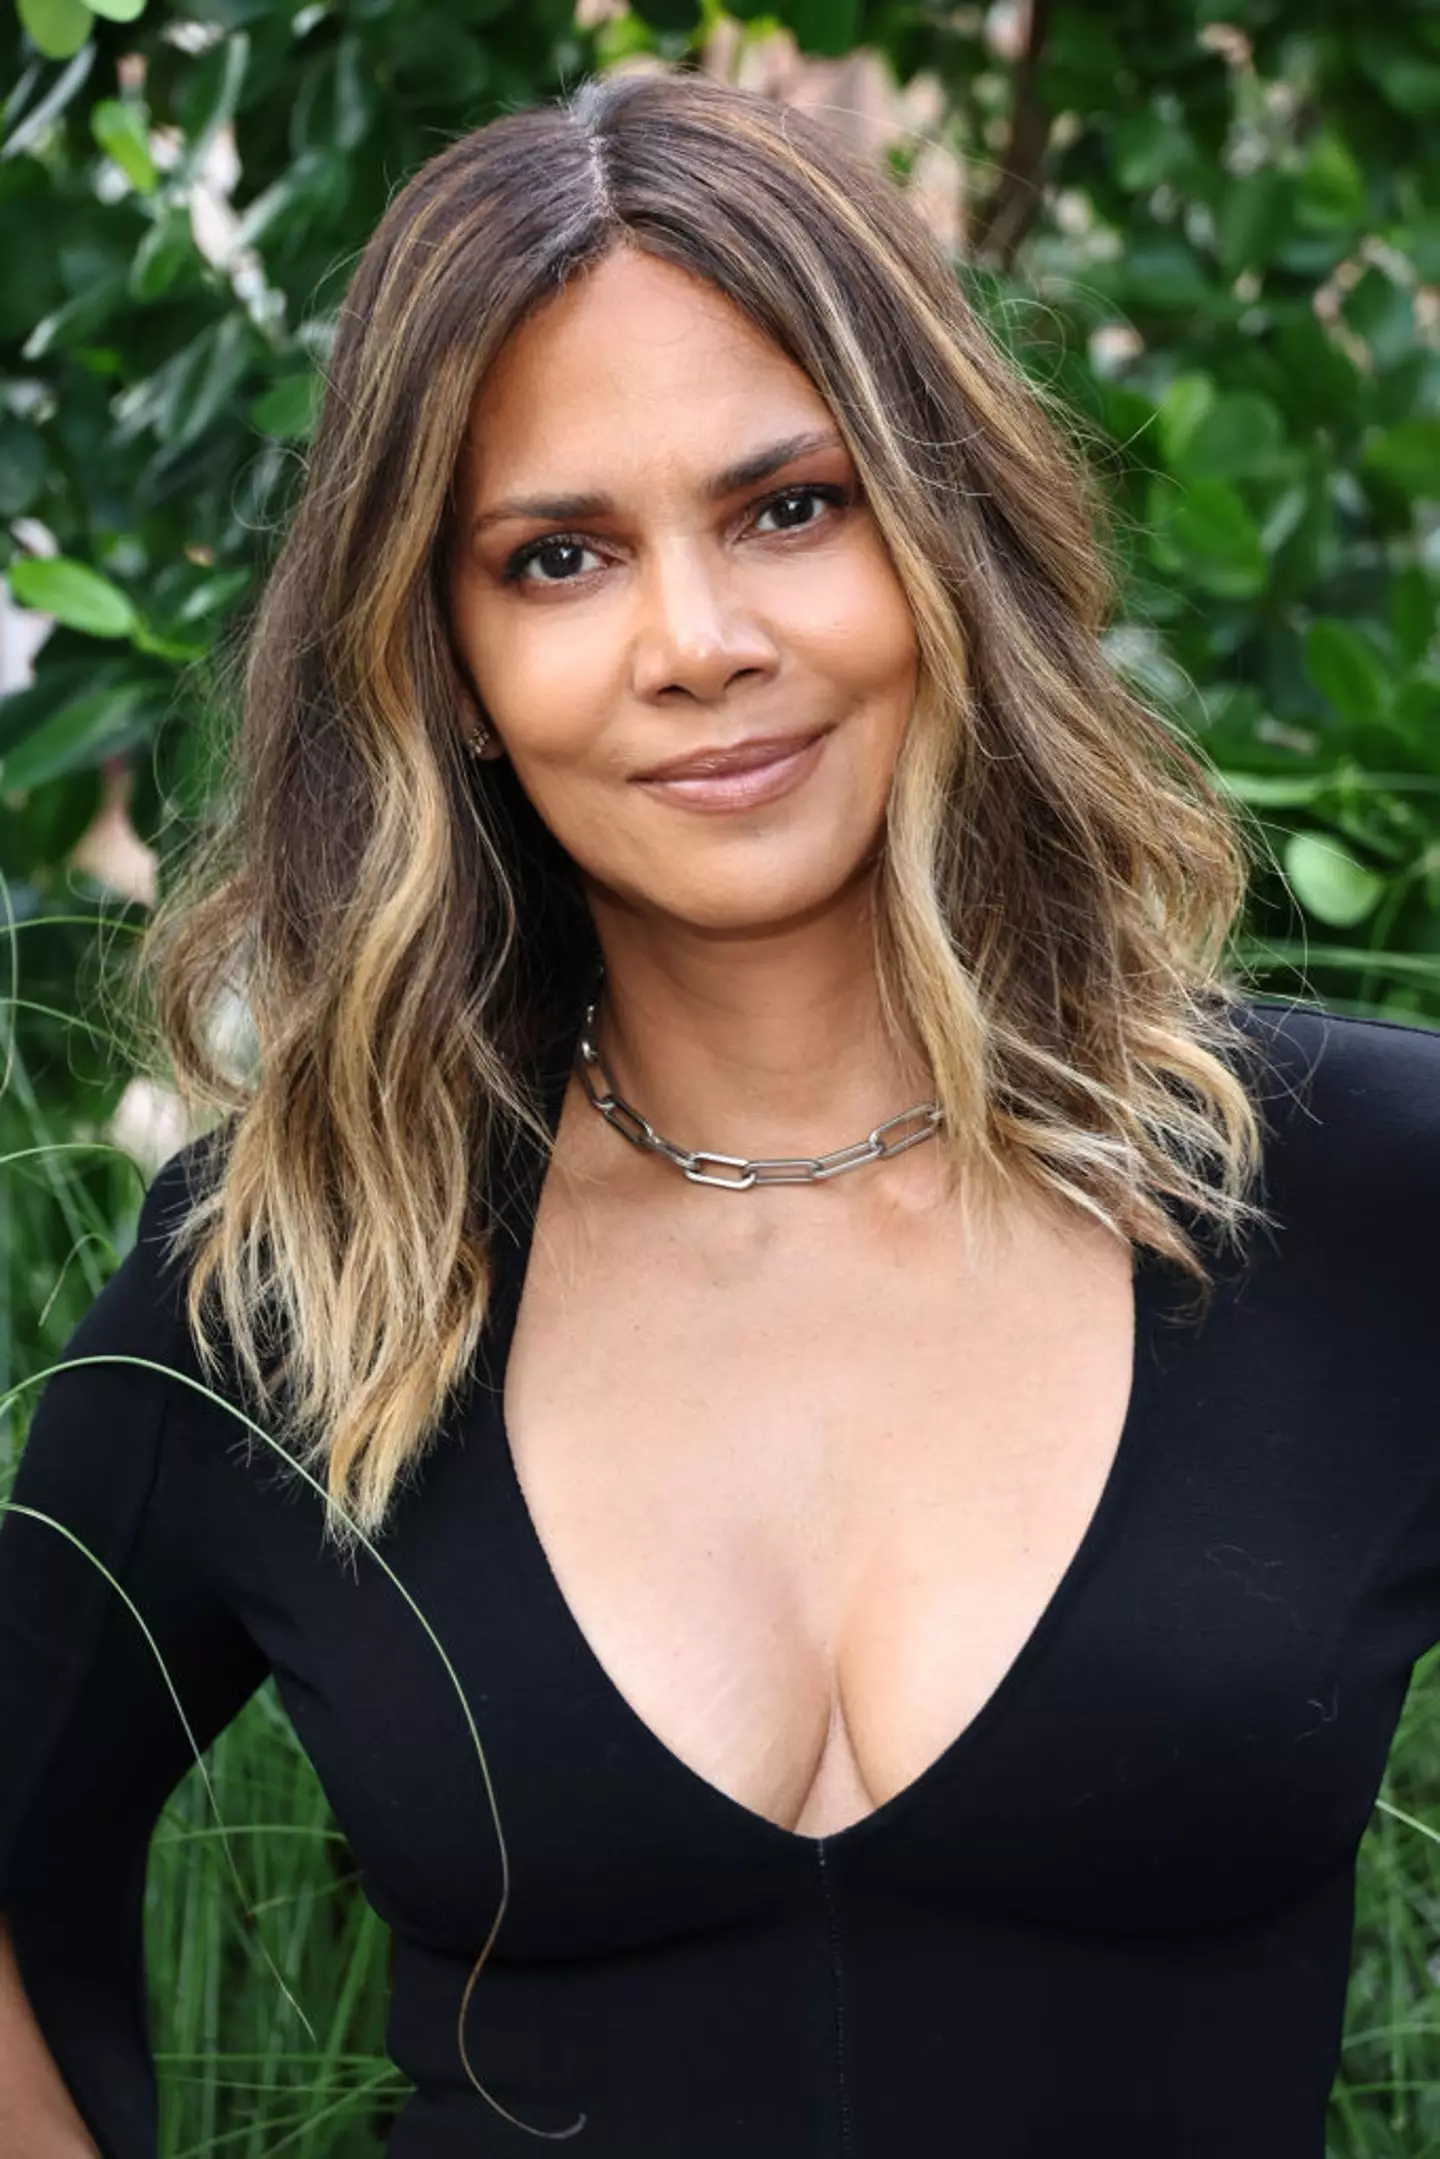 Halle Berry opened up about her perimenopause misdiagnosis.